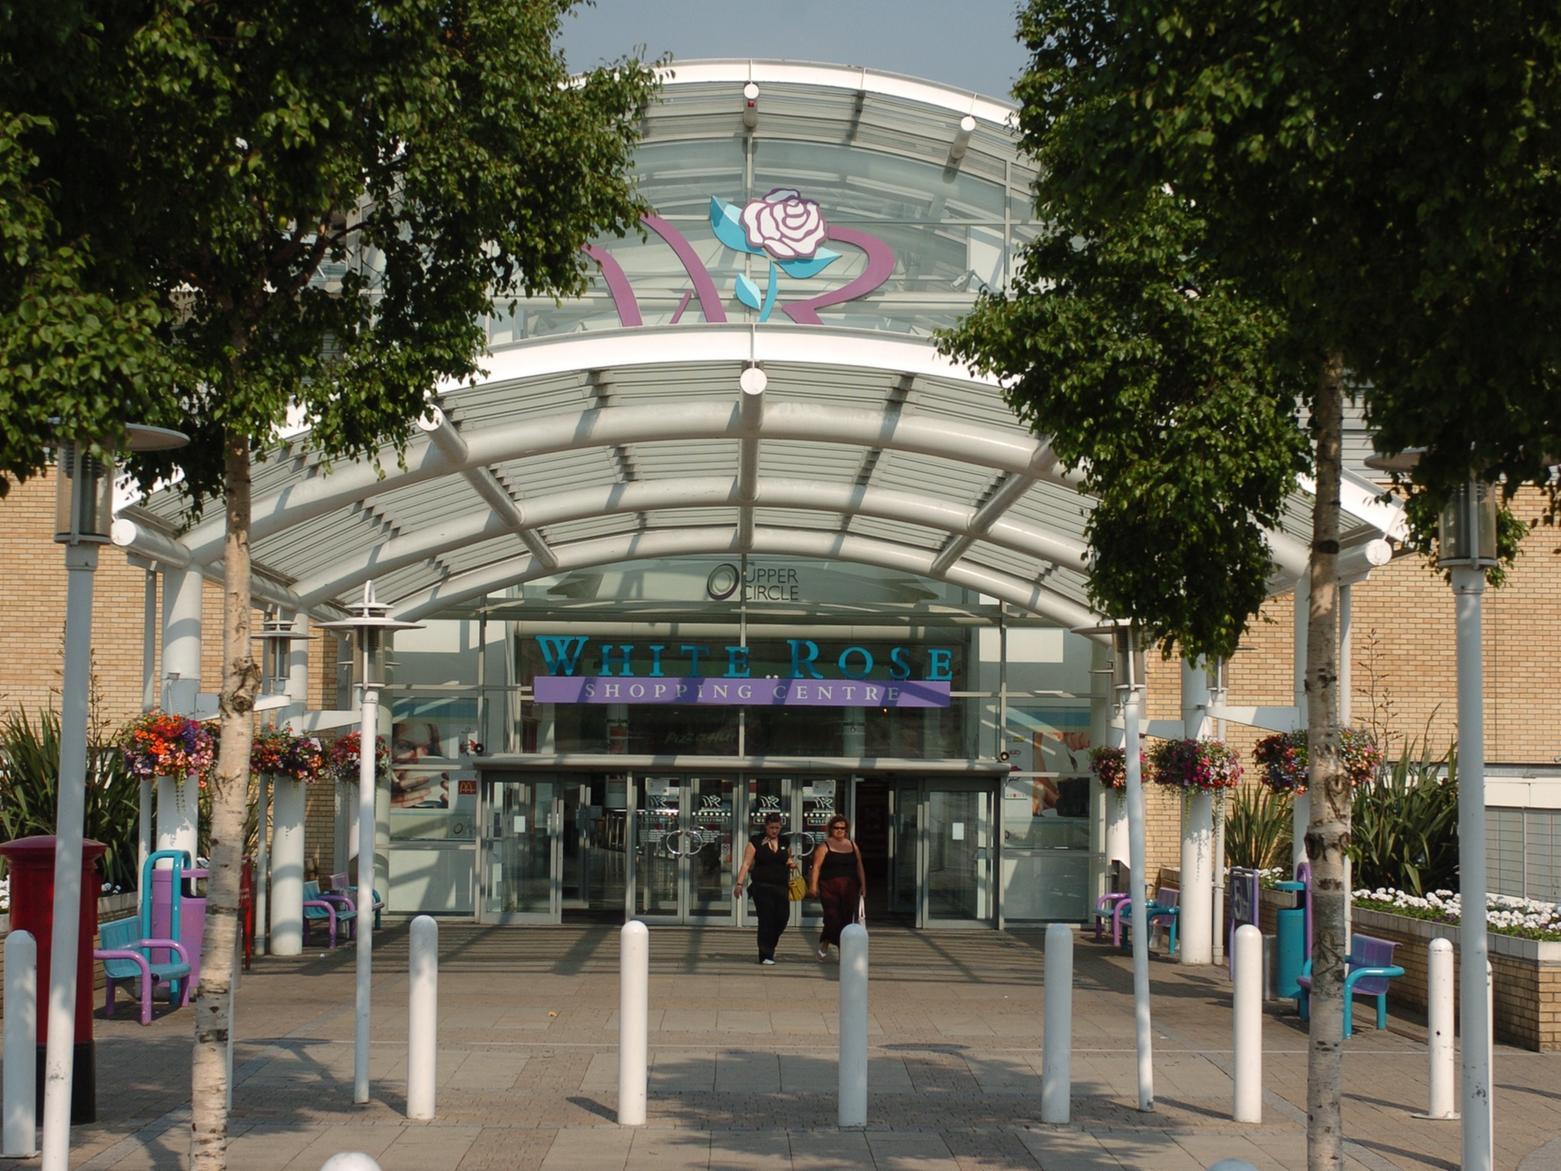 41 shoplifting offences recorded at the address of White Rose Shopping Centre, Dewsbury Road, in December 2019